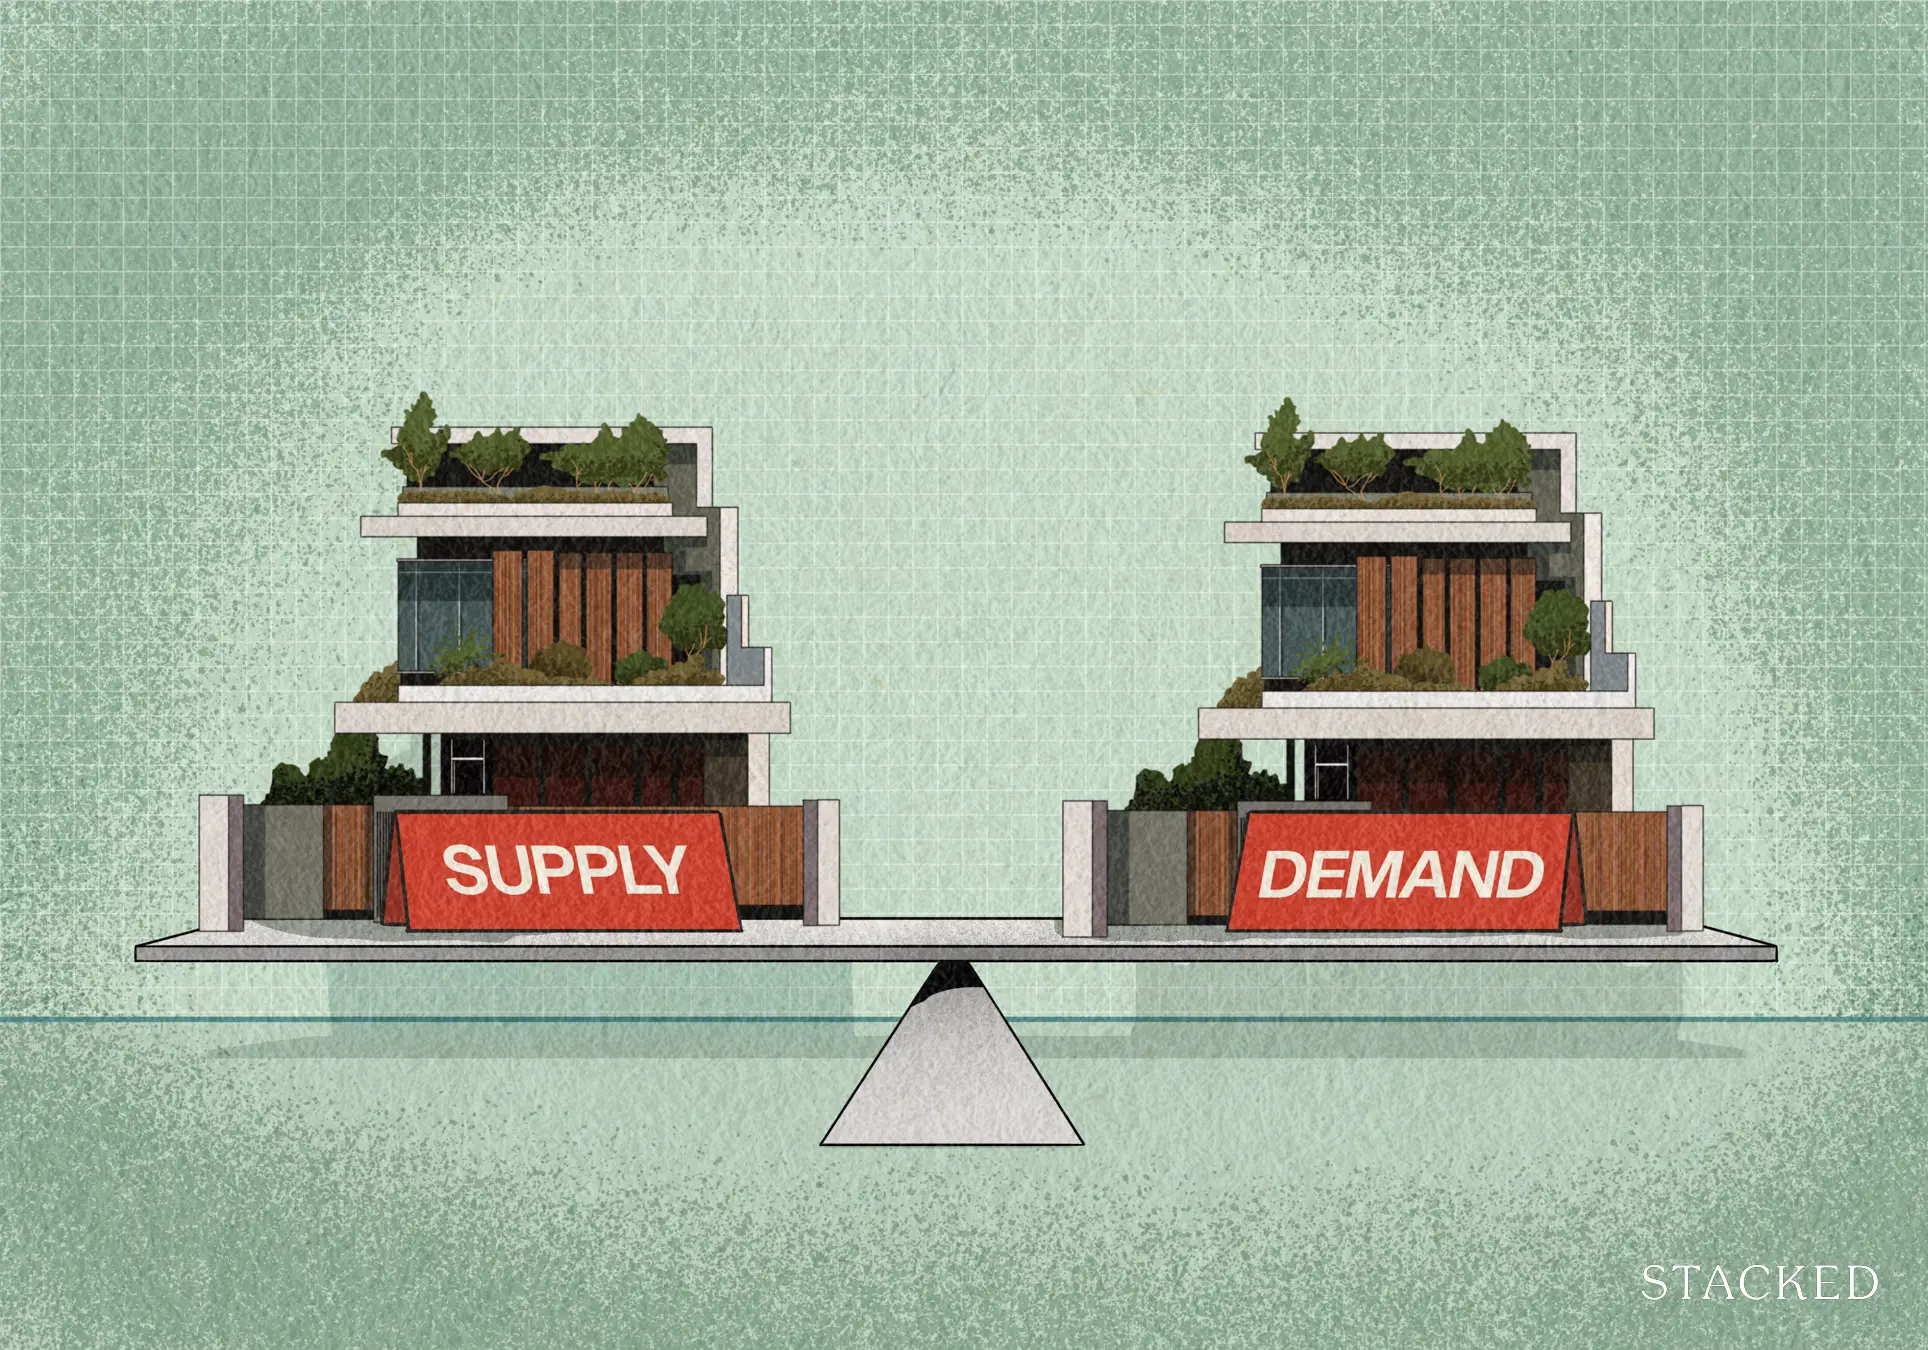 The delicate balance of supply and demand